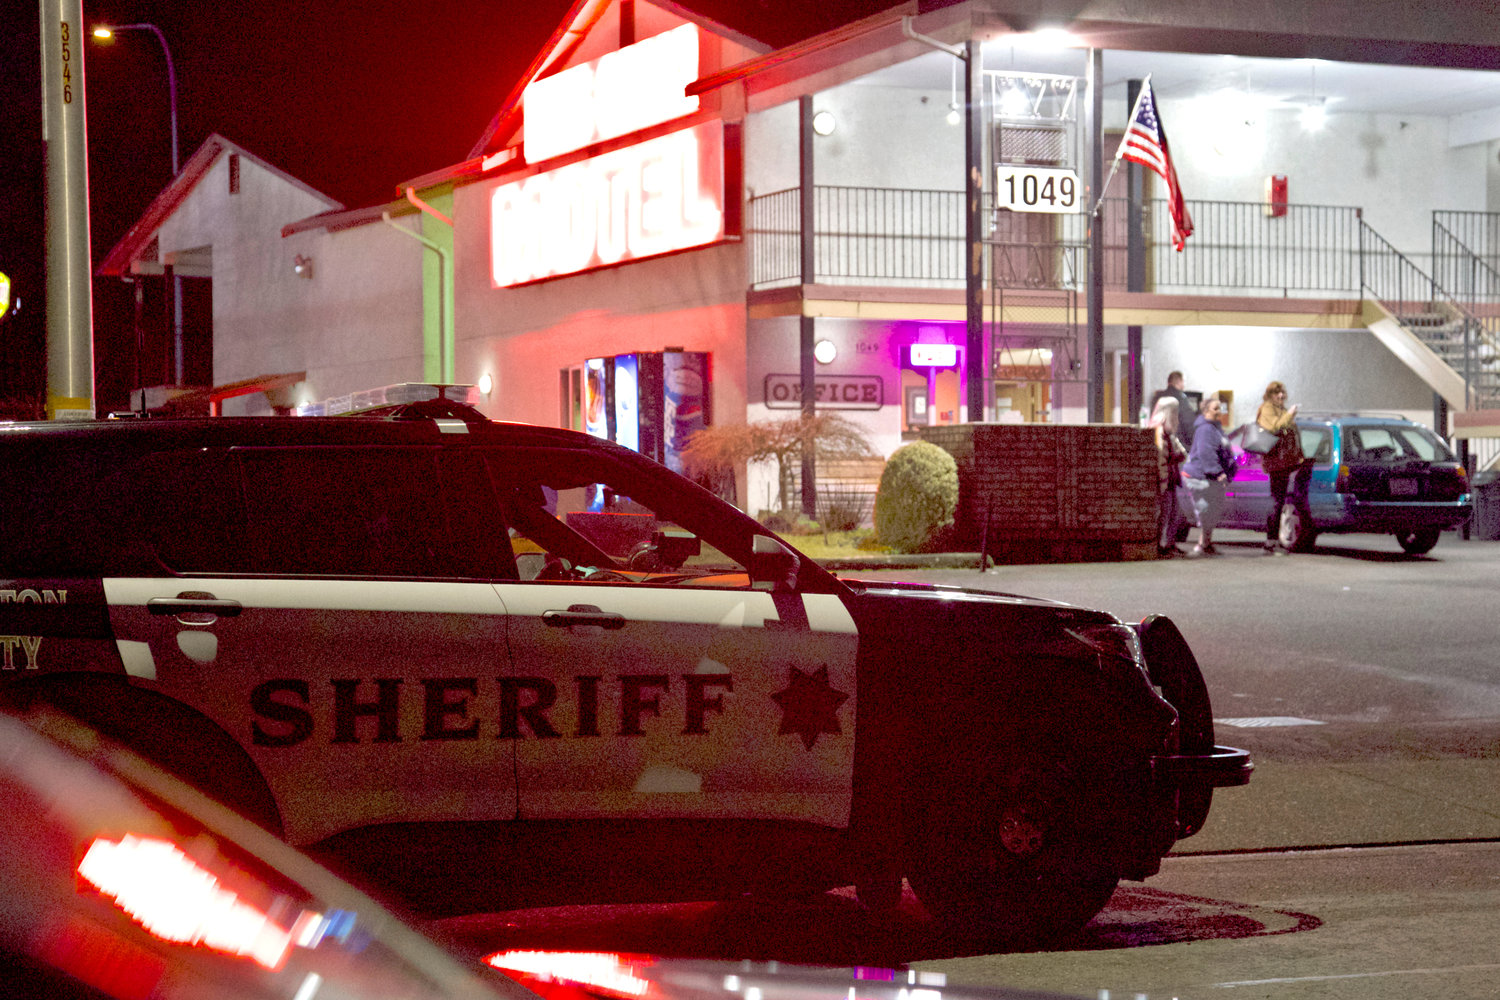 Bystanders outside the King Oscar Motel in the 1100 block of Eckerson Road watch a standoff between law enforcement and an armed individual occurring on private property across the street Sunday night. 